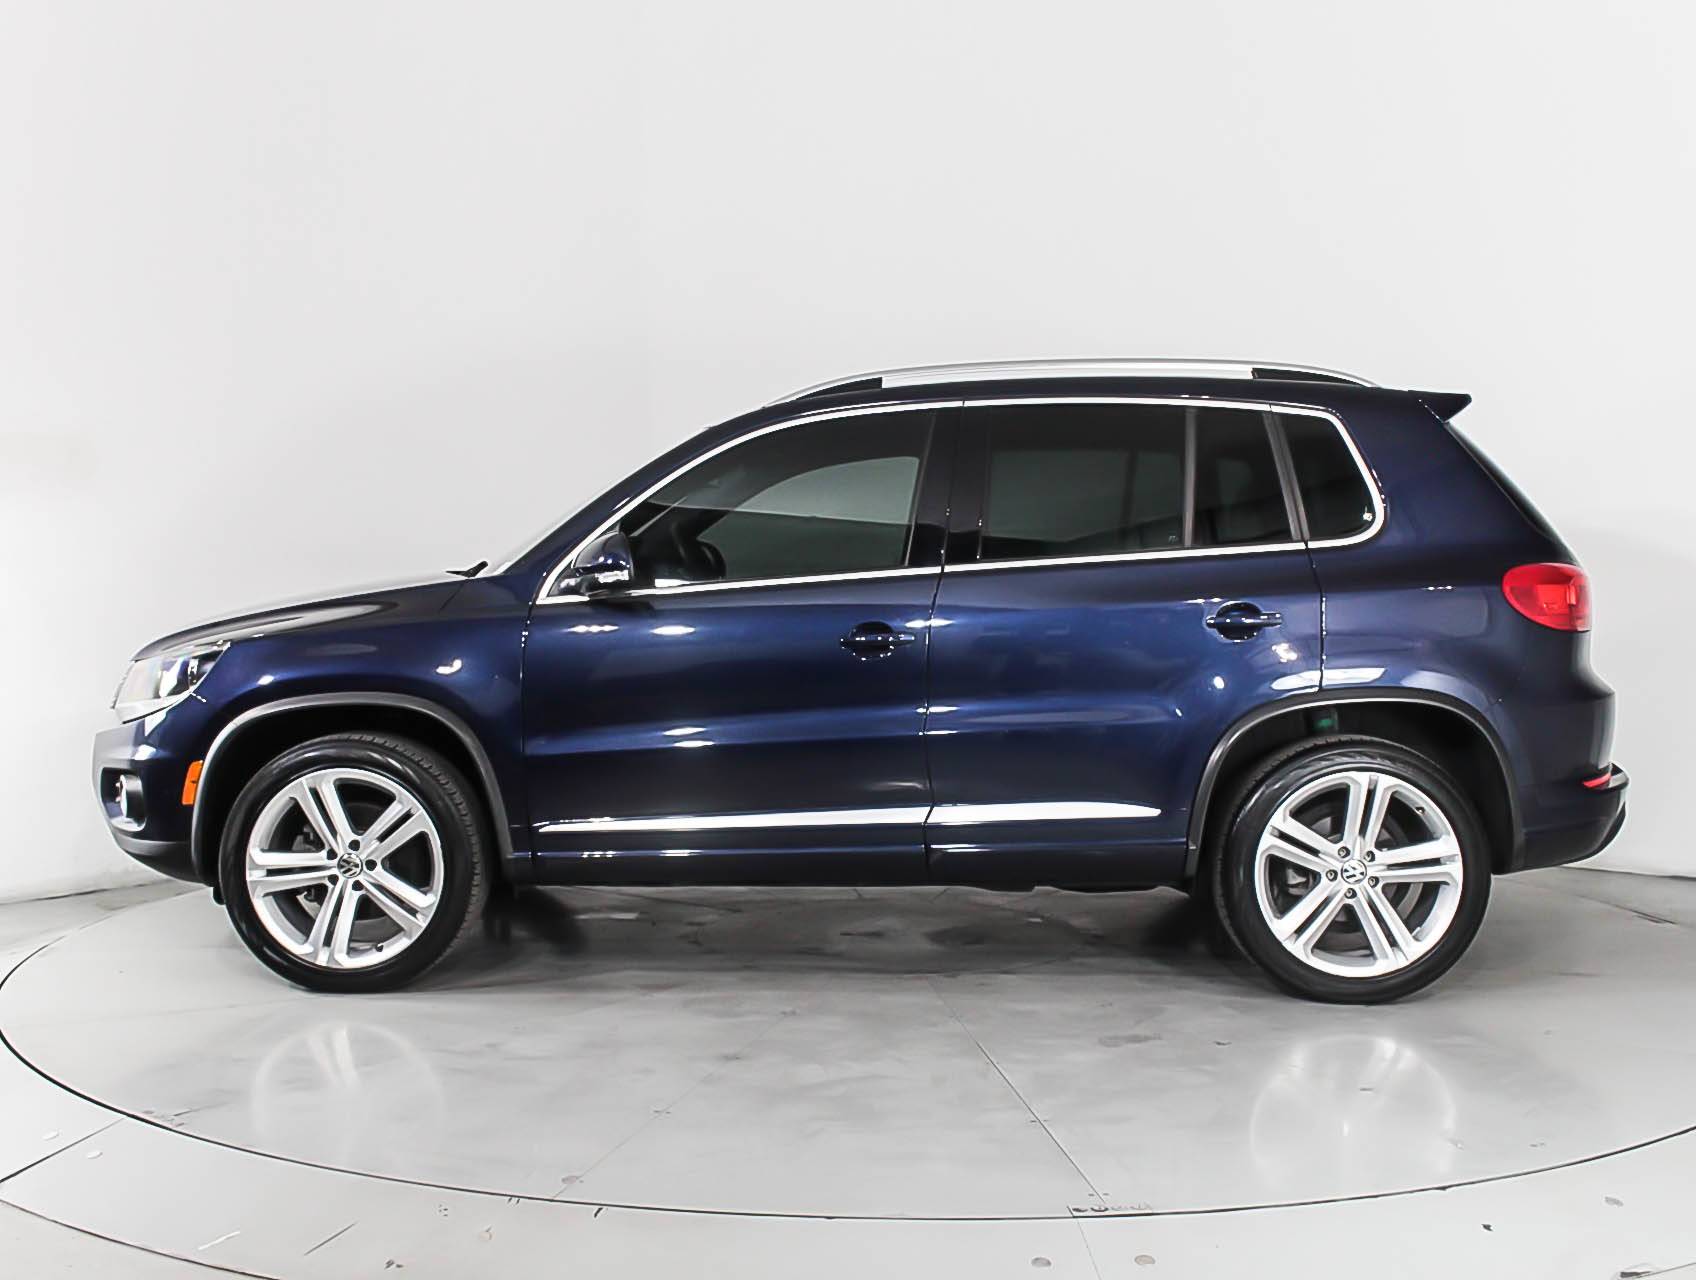 Florida Fine Cars - Used VOLKSWAGEN TIGUAN 2016 HOLLYWOOD R-Line